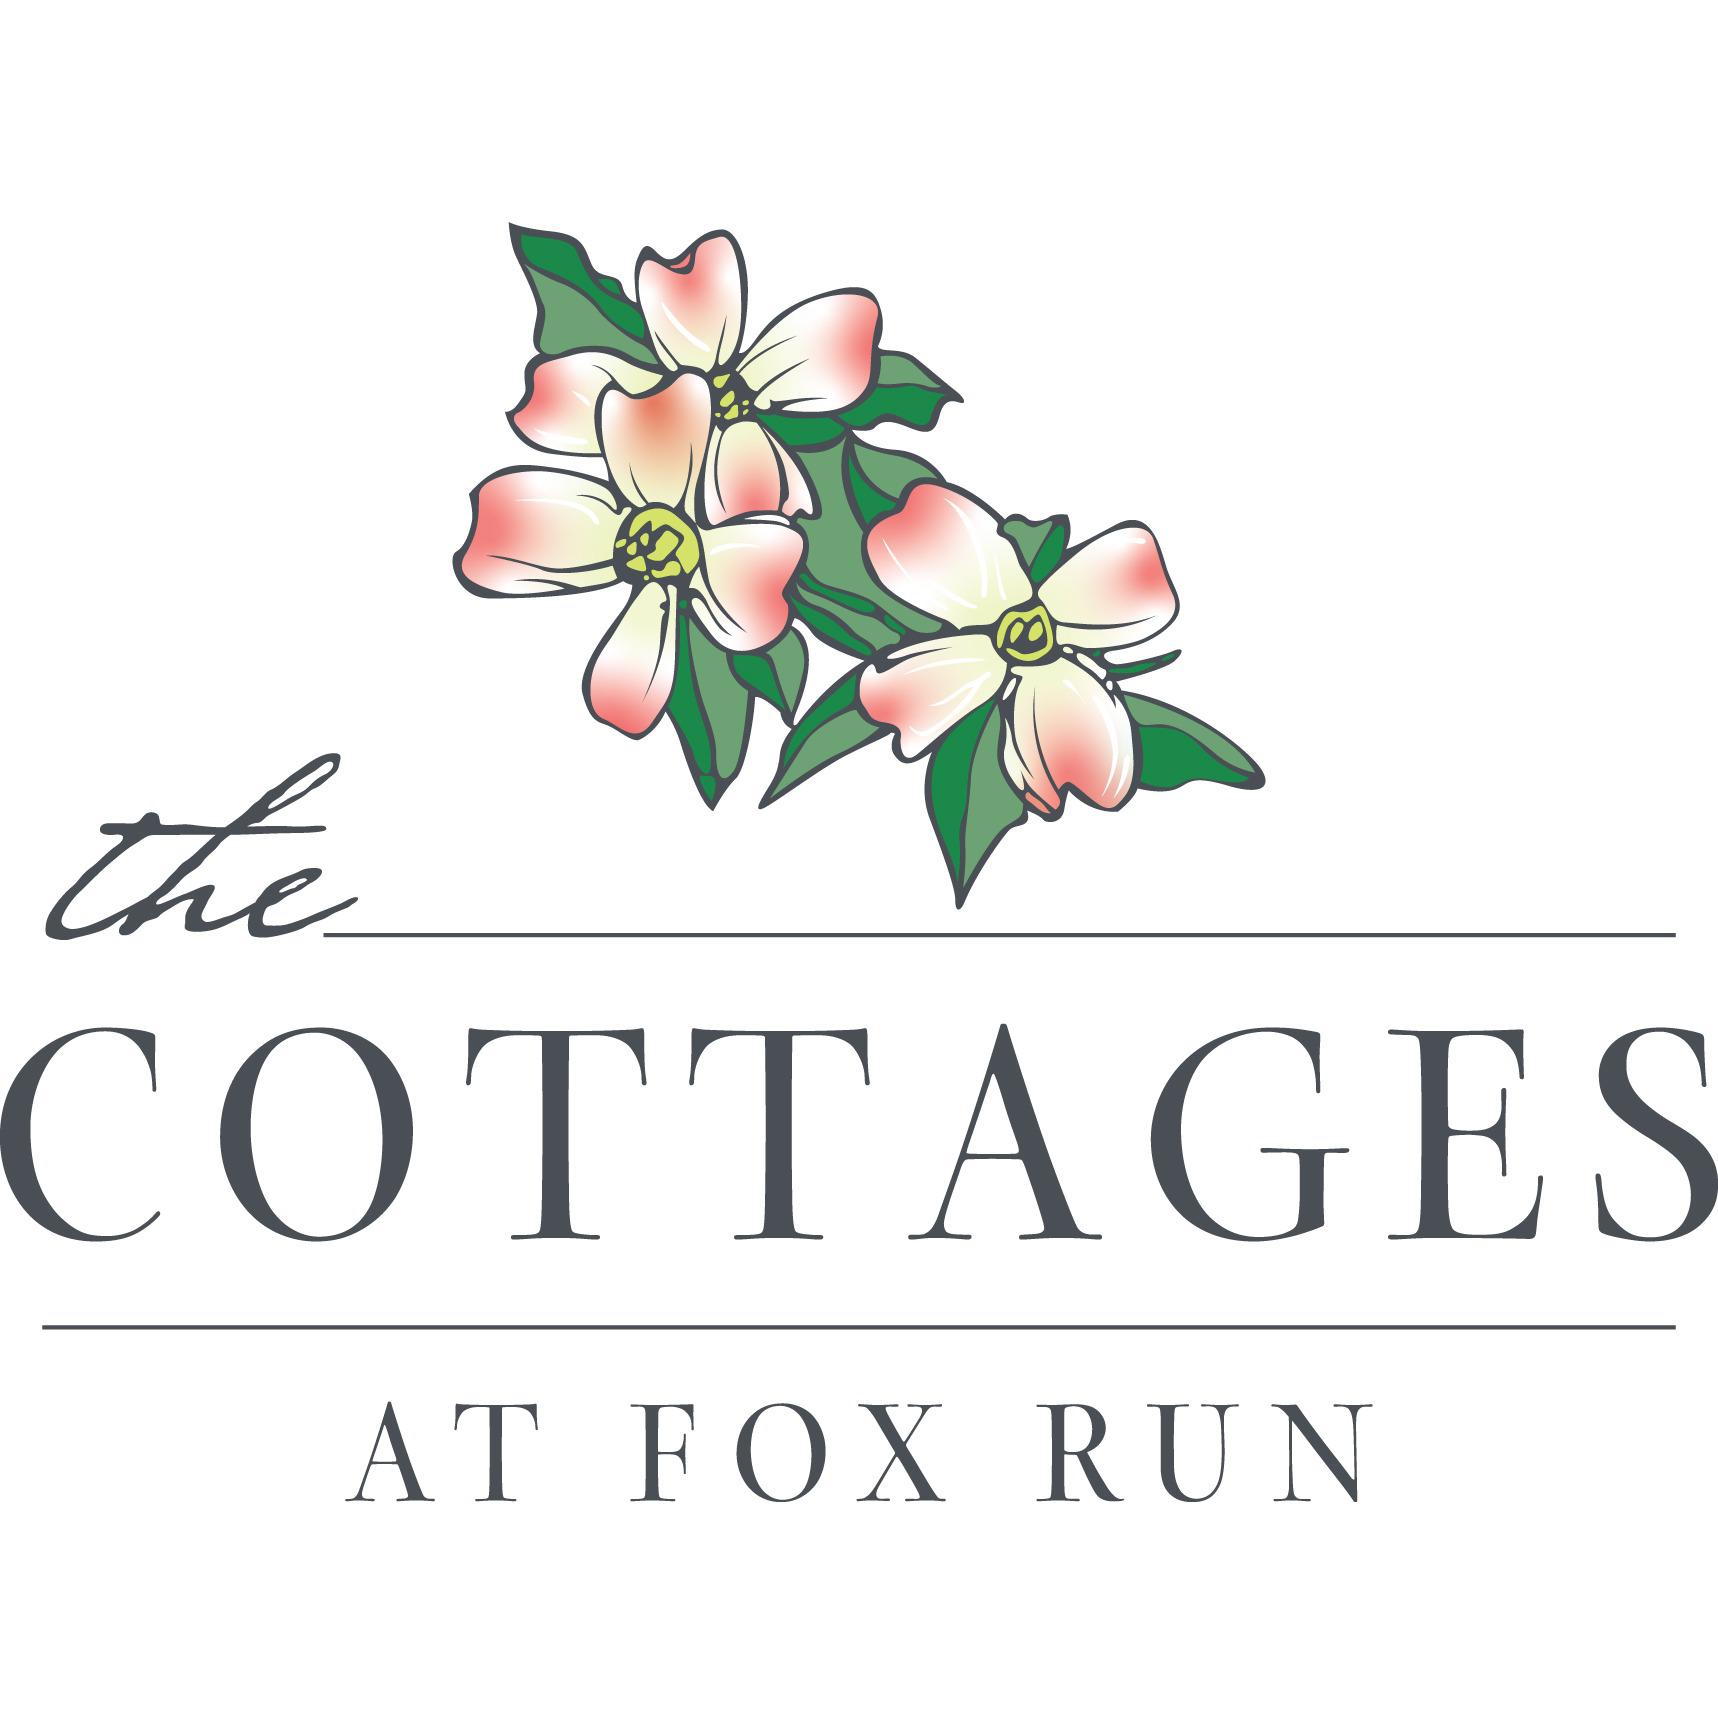 The Cottages at Fox Run